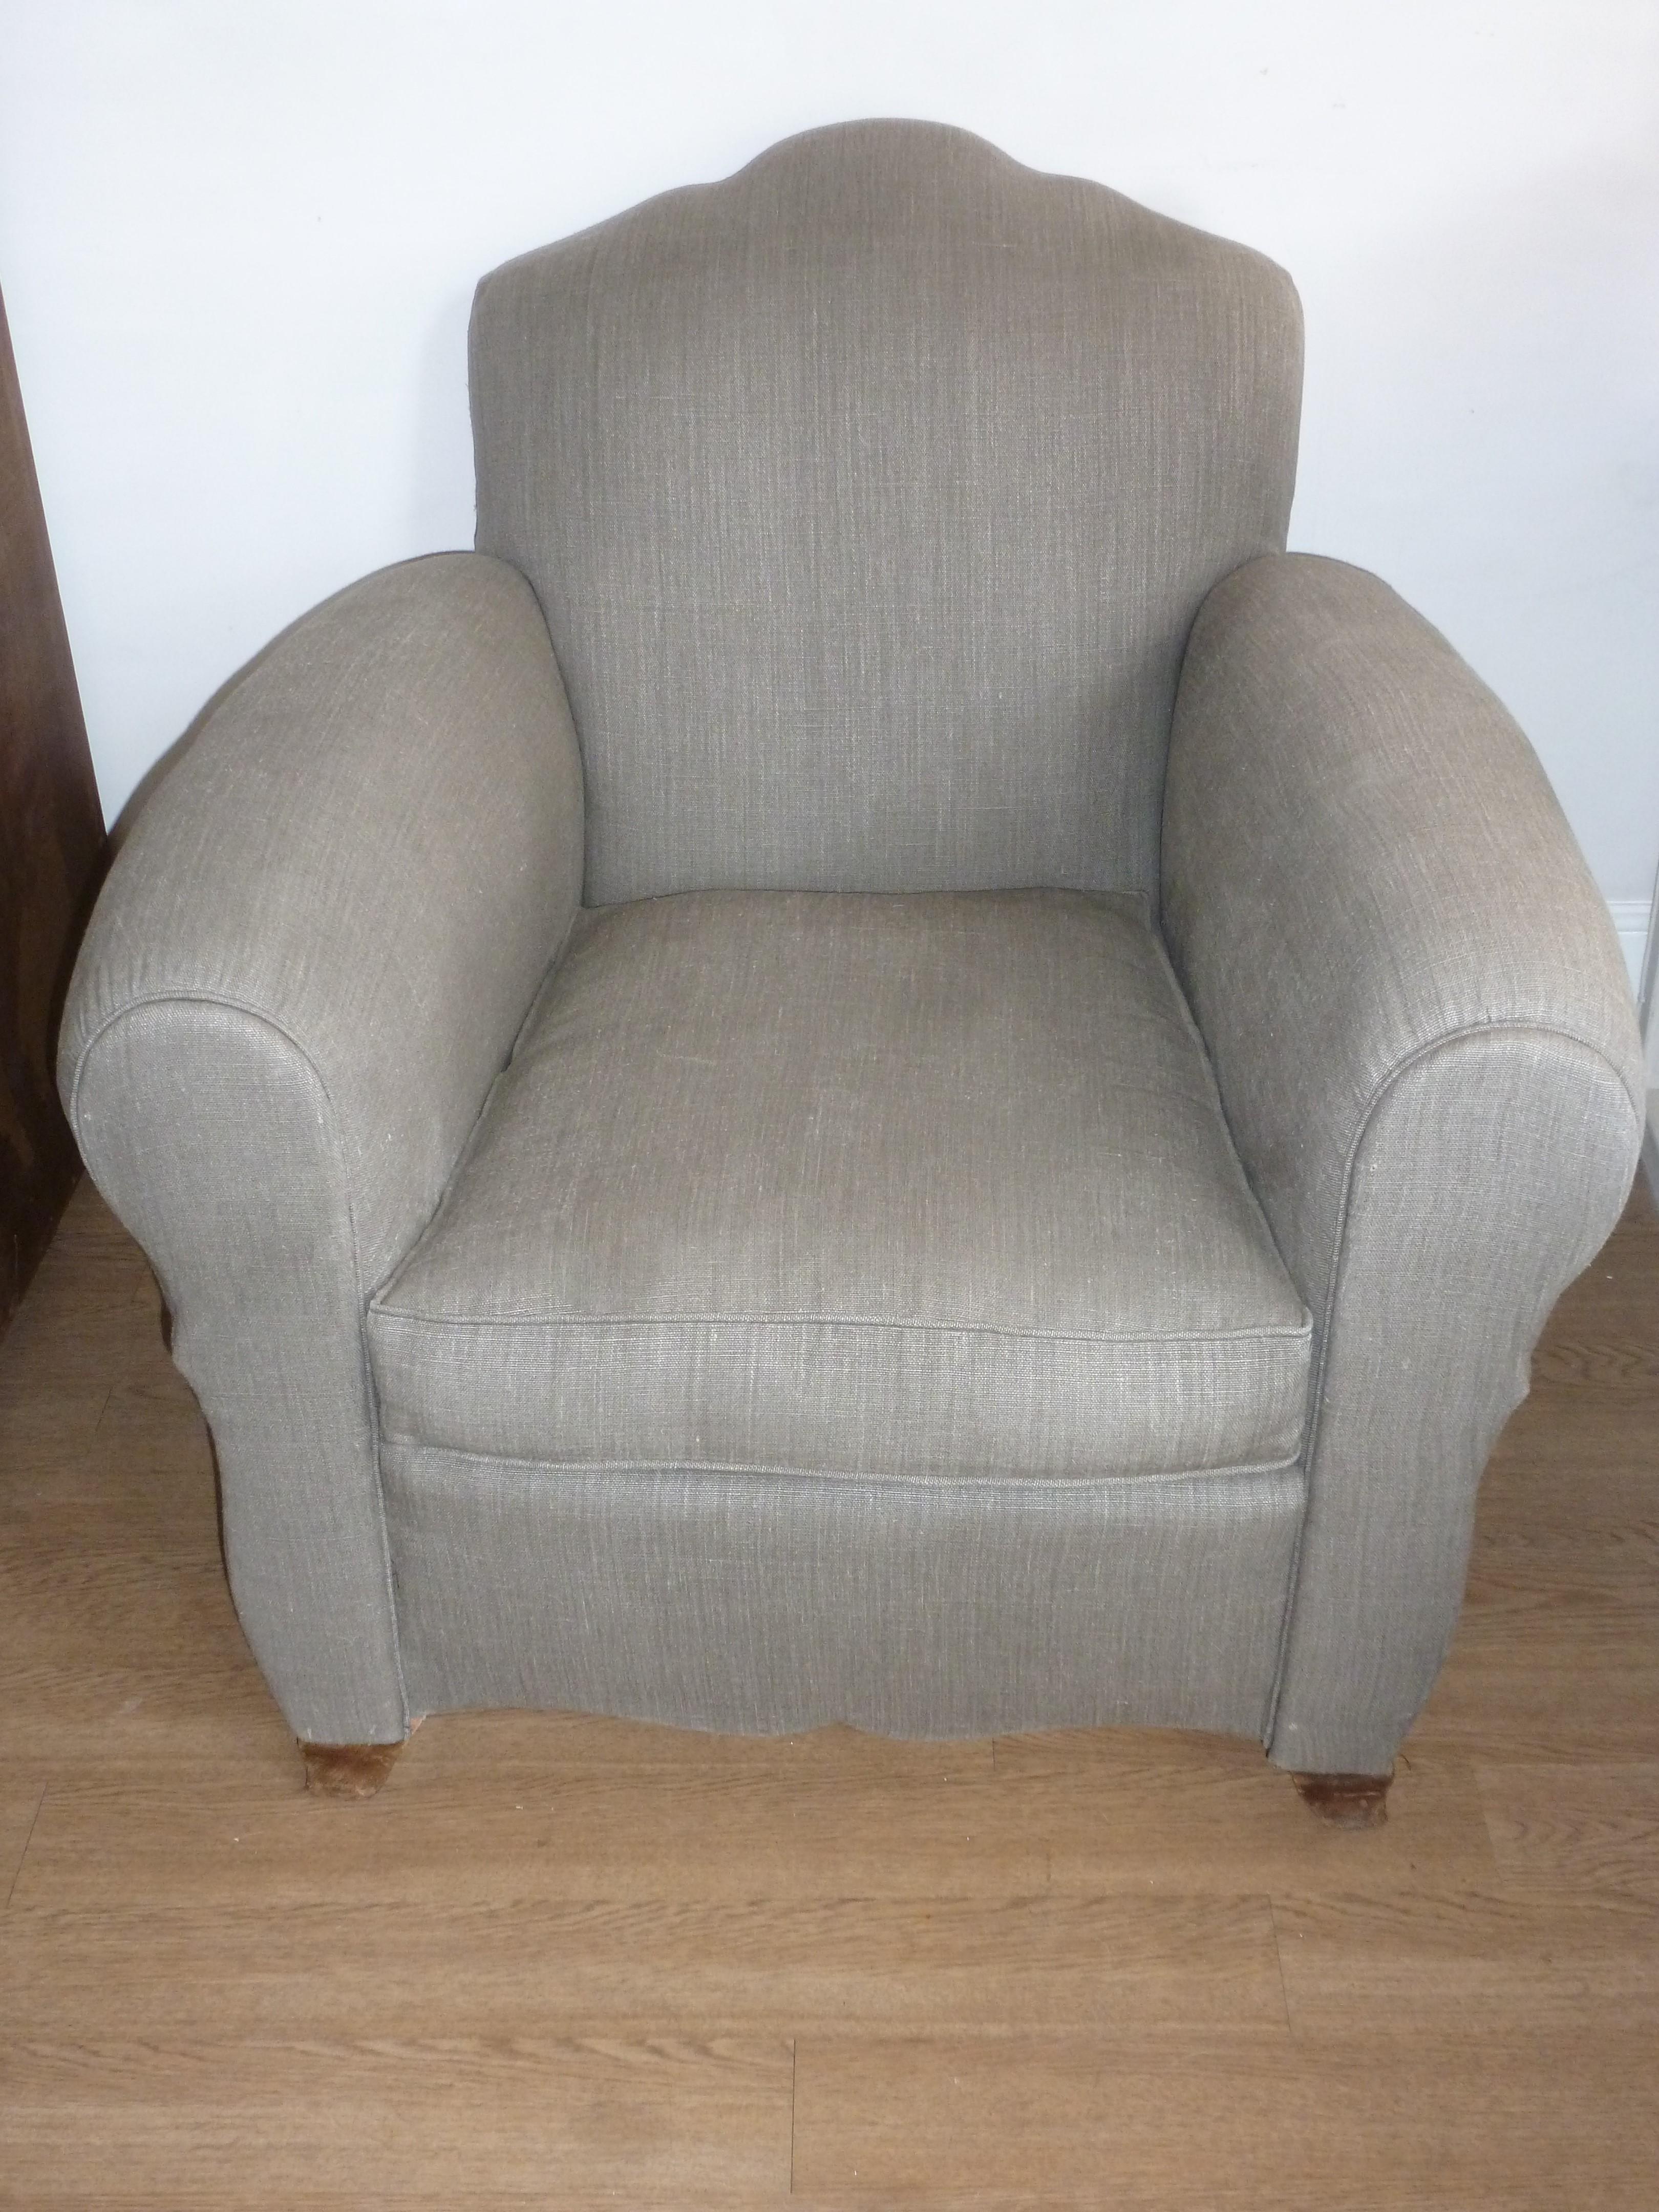 Iconic 1940 French Art Deco Club Chair Armchair Re-Upholstered Grey French Linen In Good Condition For Sale In Dorking, Surrey